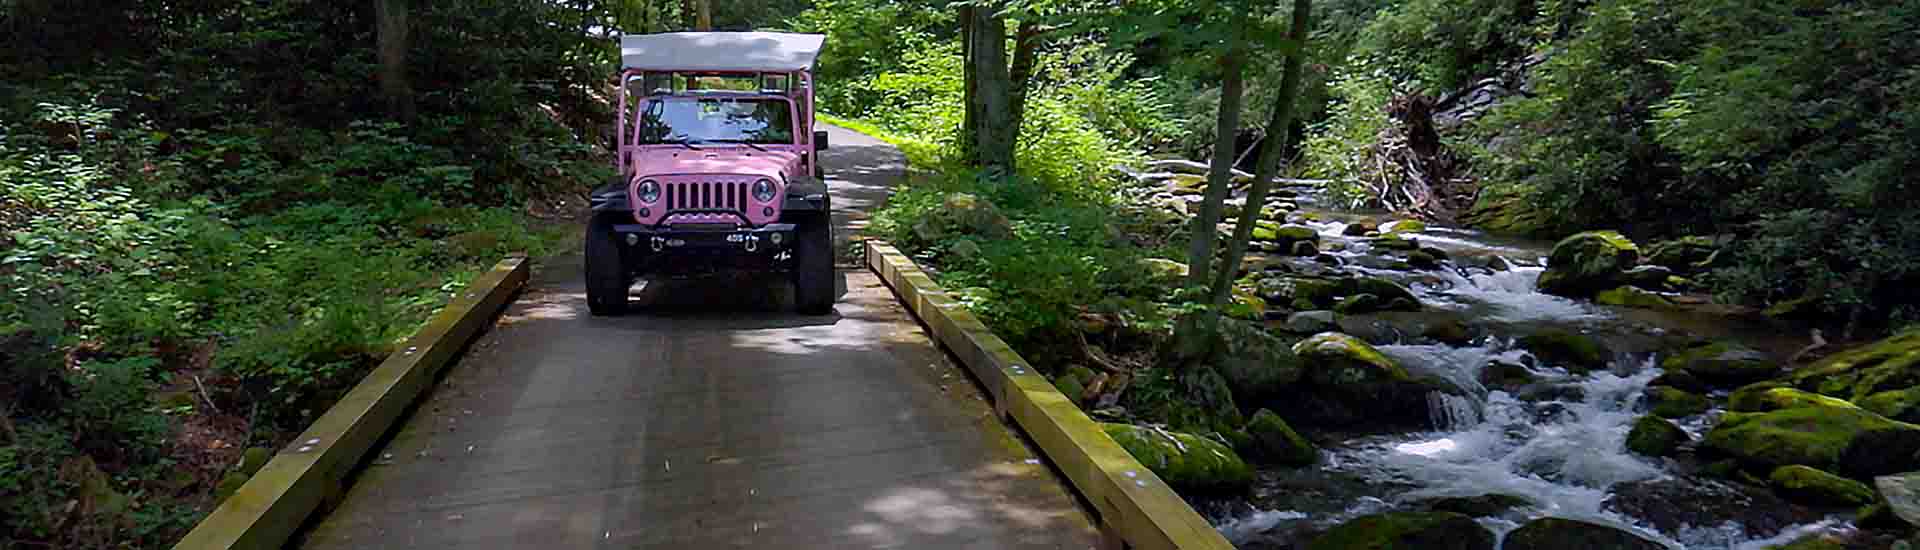 Pink® Jeep® traveling along the Roaring Fork Motor Nature Trail with flowing stream to right, GSMNP